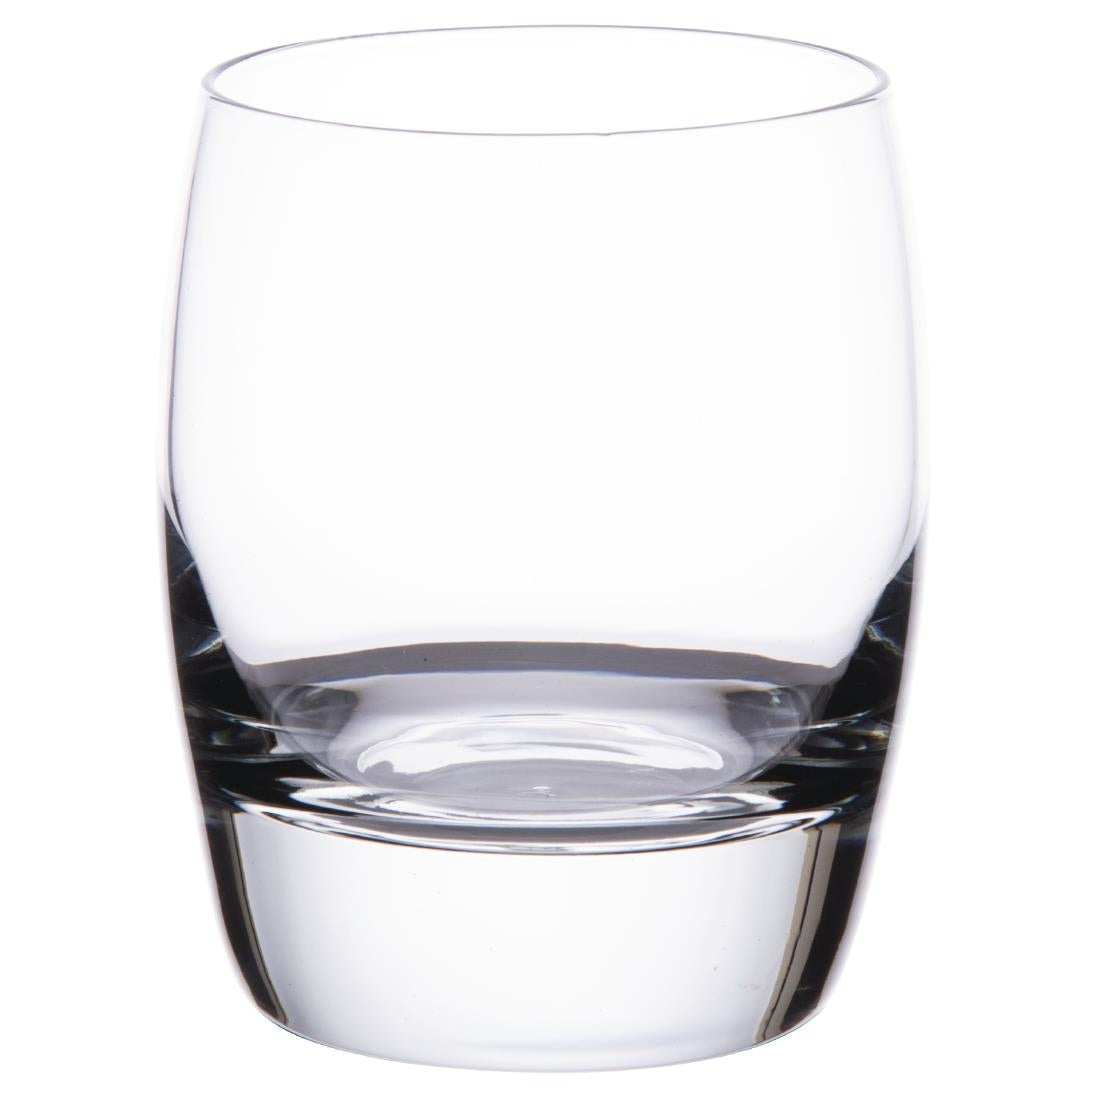 DX724 Artis Endessa Old Fashioned Glasses 265ml (Pack of 12)